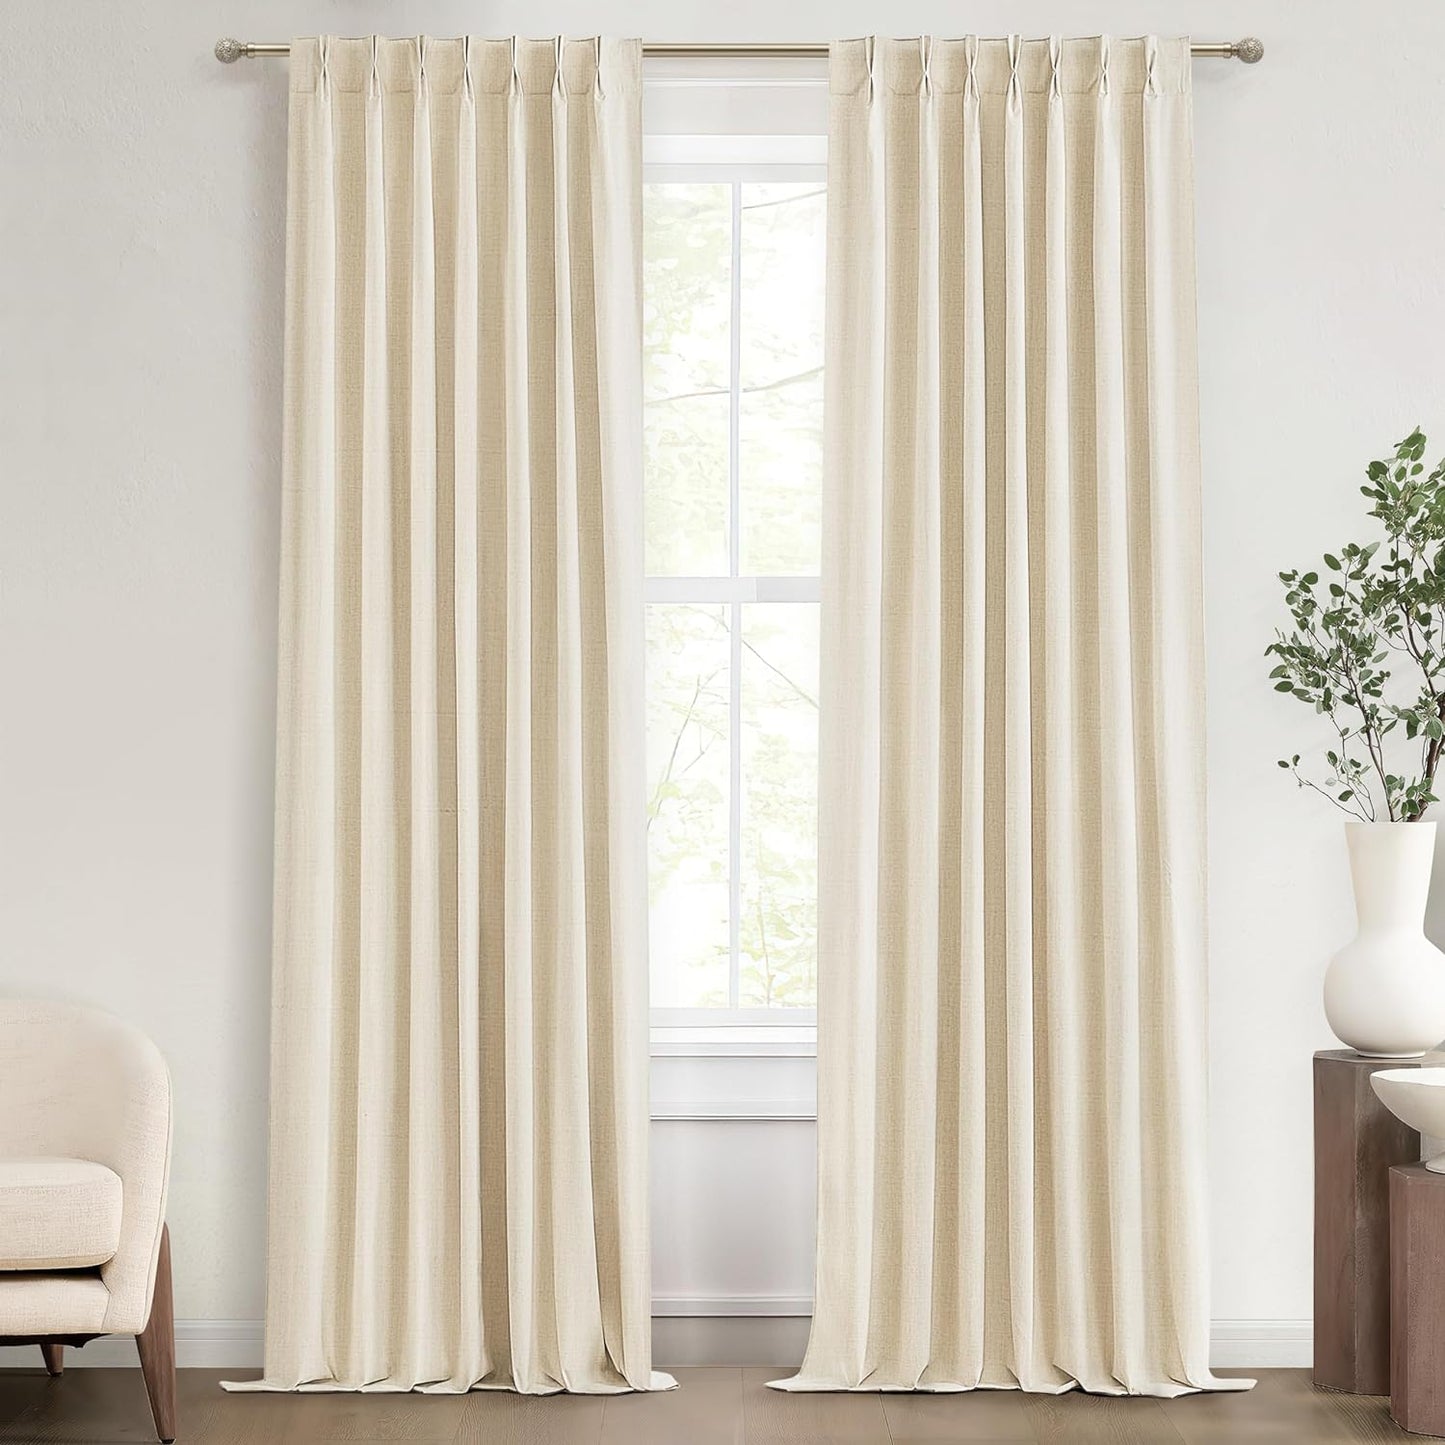 Natural Linen Pinch Pleated Blackout Curtains & Drapes 96 Inch Long Bedroom/Livingroom Farmhouse Curtains 2 Panel Sets, Neutral Track Room Darkening Thermal Insulated 8Ft Back Tab Window Curtain  QJmydeco Light Beige 40"W X 105"L X 2 Panels 